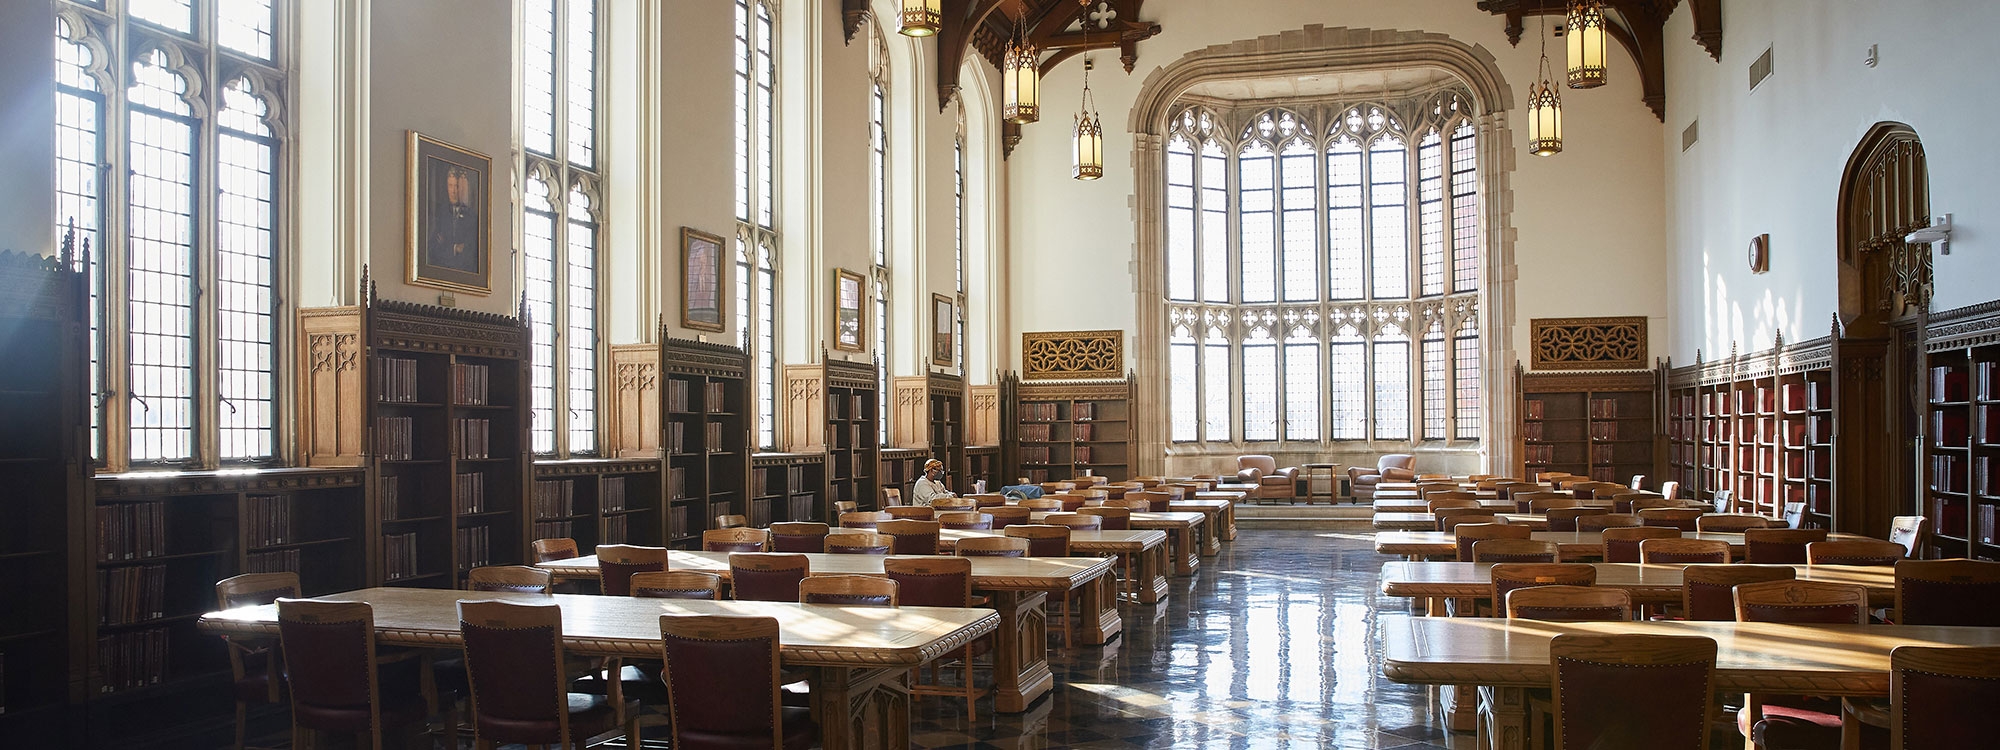 The Great Reading Room in the OU Bizzell Libary.